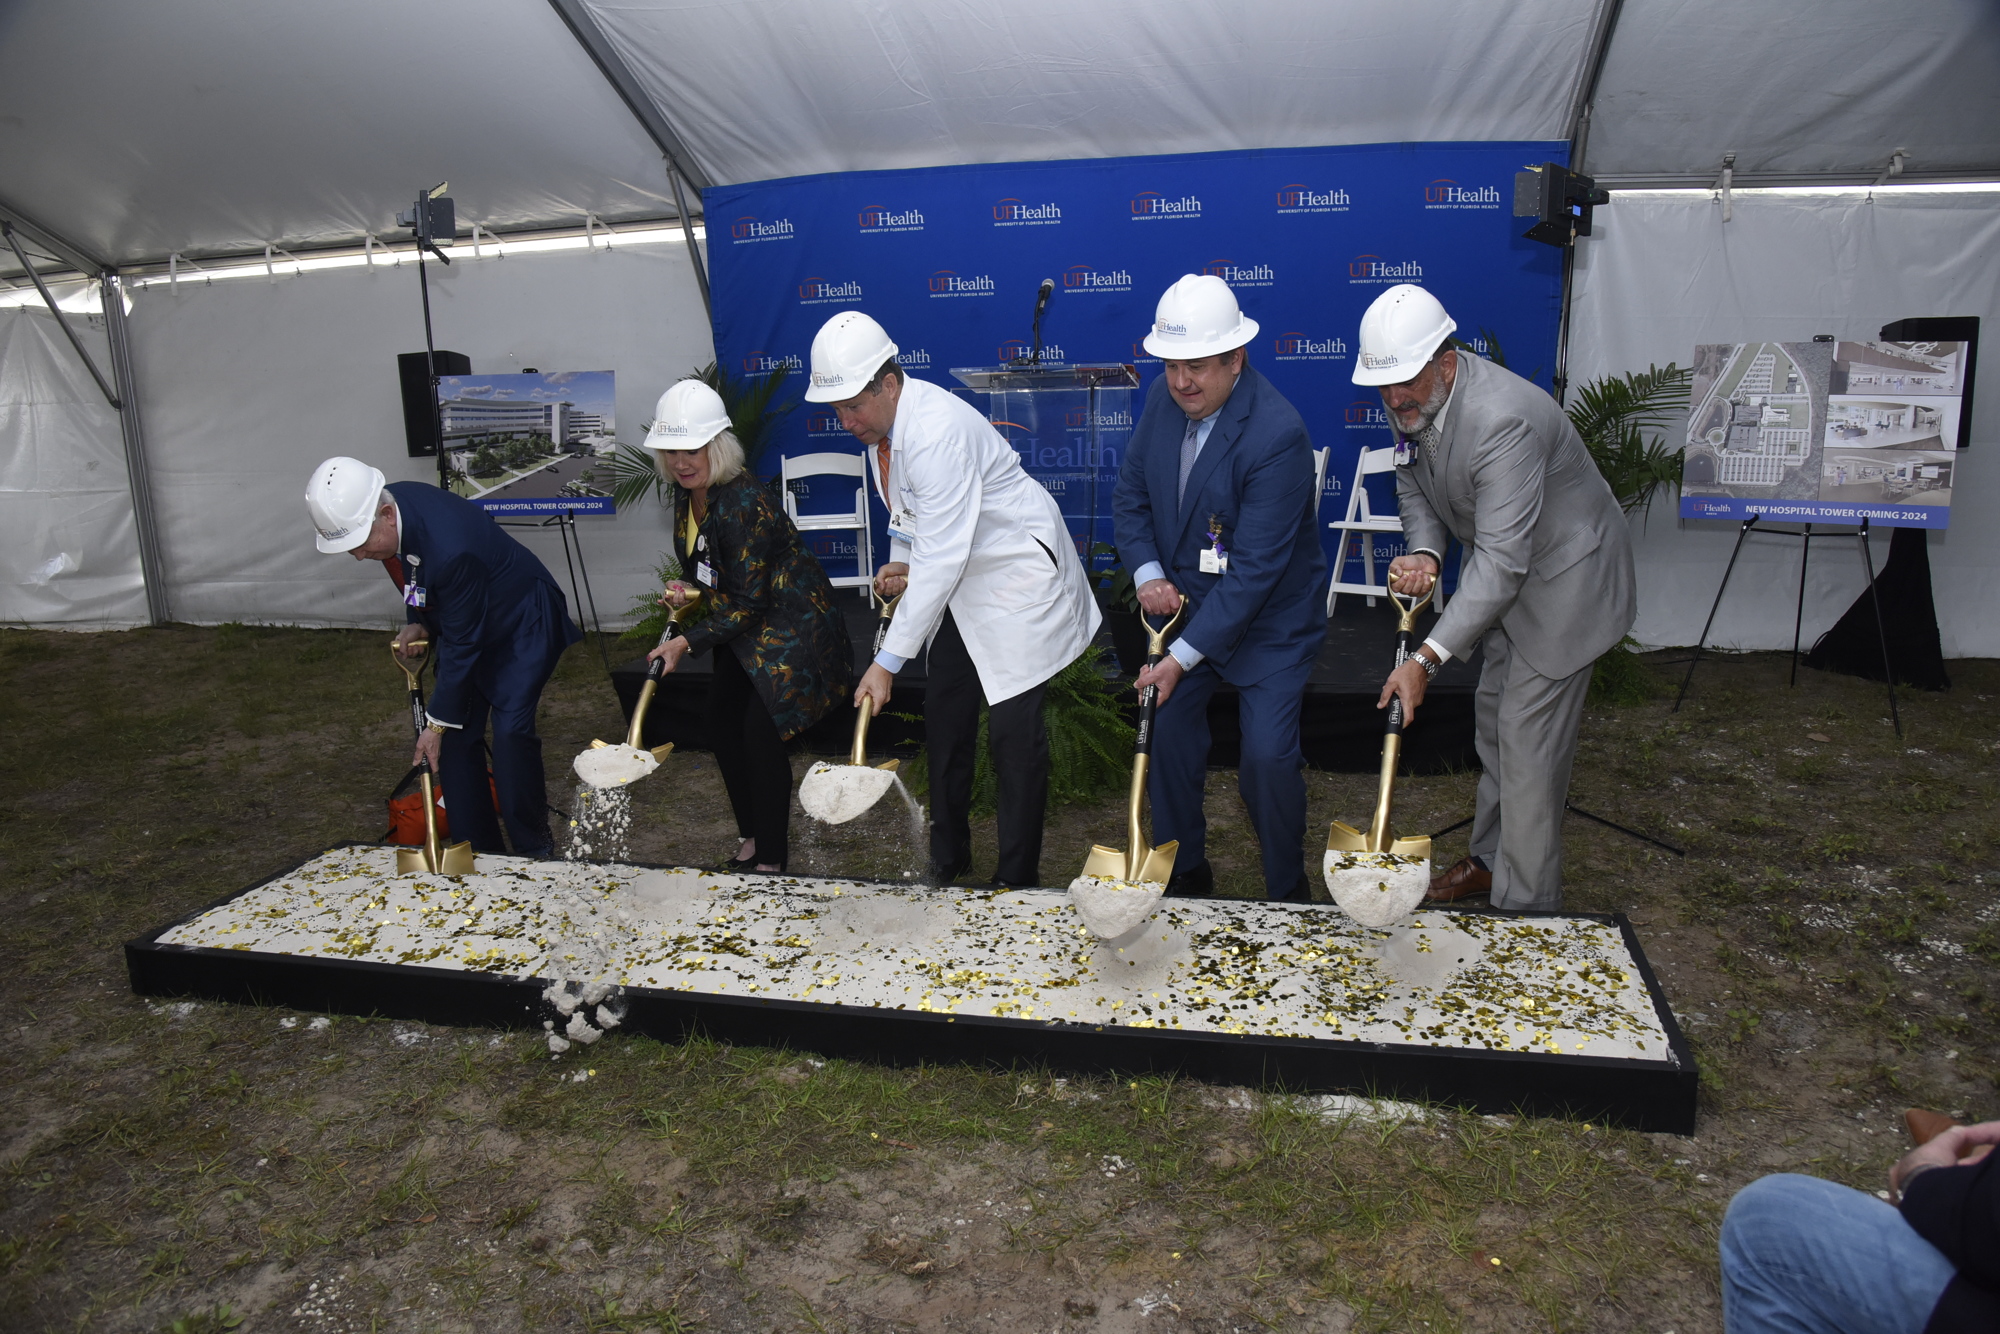 UF Health officials Russ Armistead, Linda Edwards, Greg Miller and Wayne Marshall take part in the ceremonial groundbreaking ceremony at UF Health North on March 31.